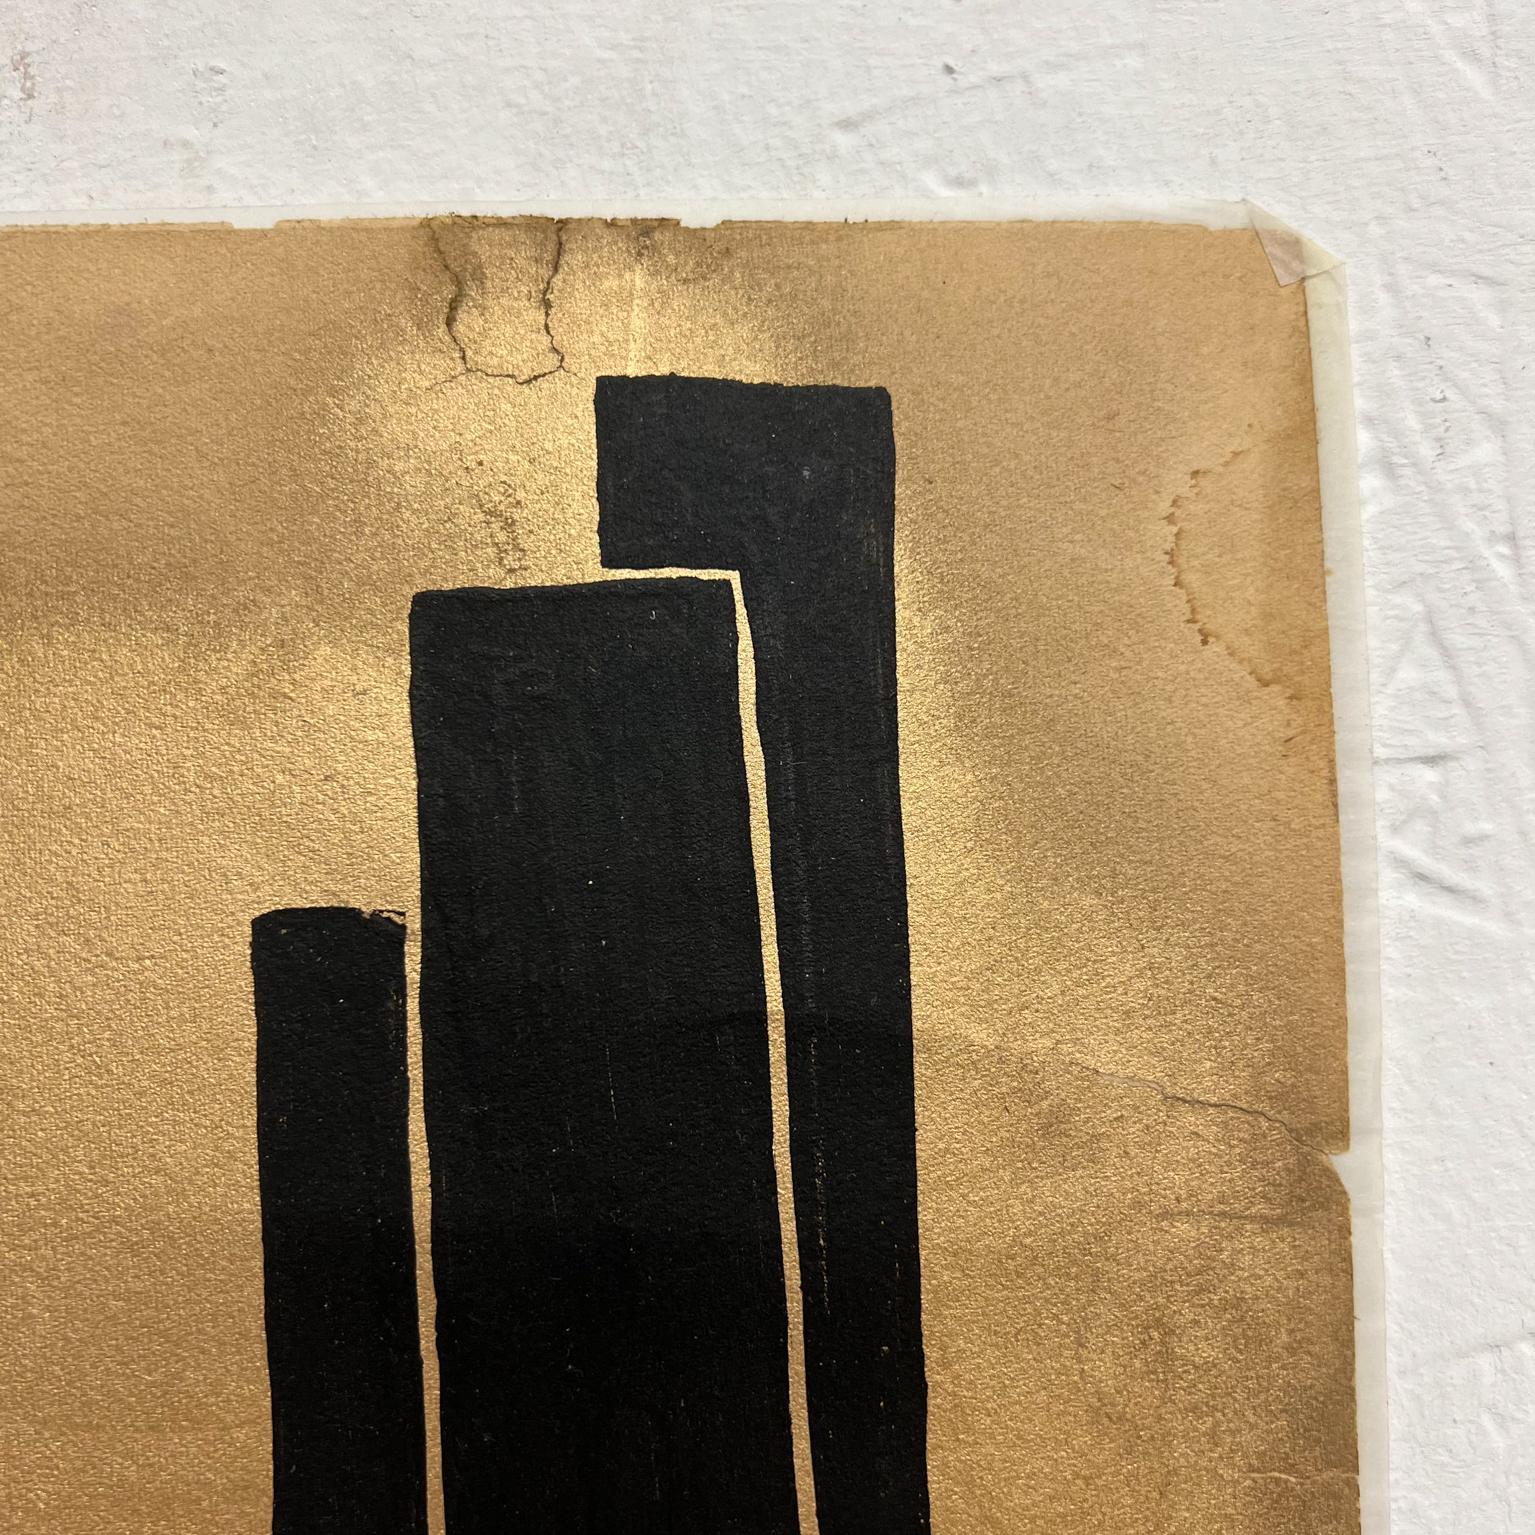 1960s Abstract Modernism Art Mexico Artist M. Goeritz Gold Gilt Paper Black Ink In Good Condition For Sale In Chula Vista, CA